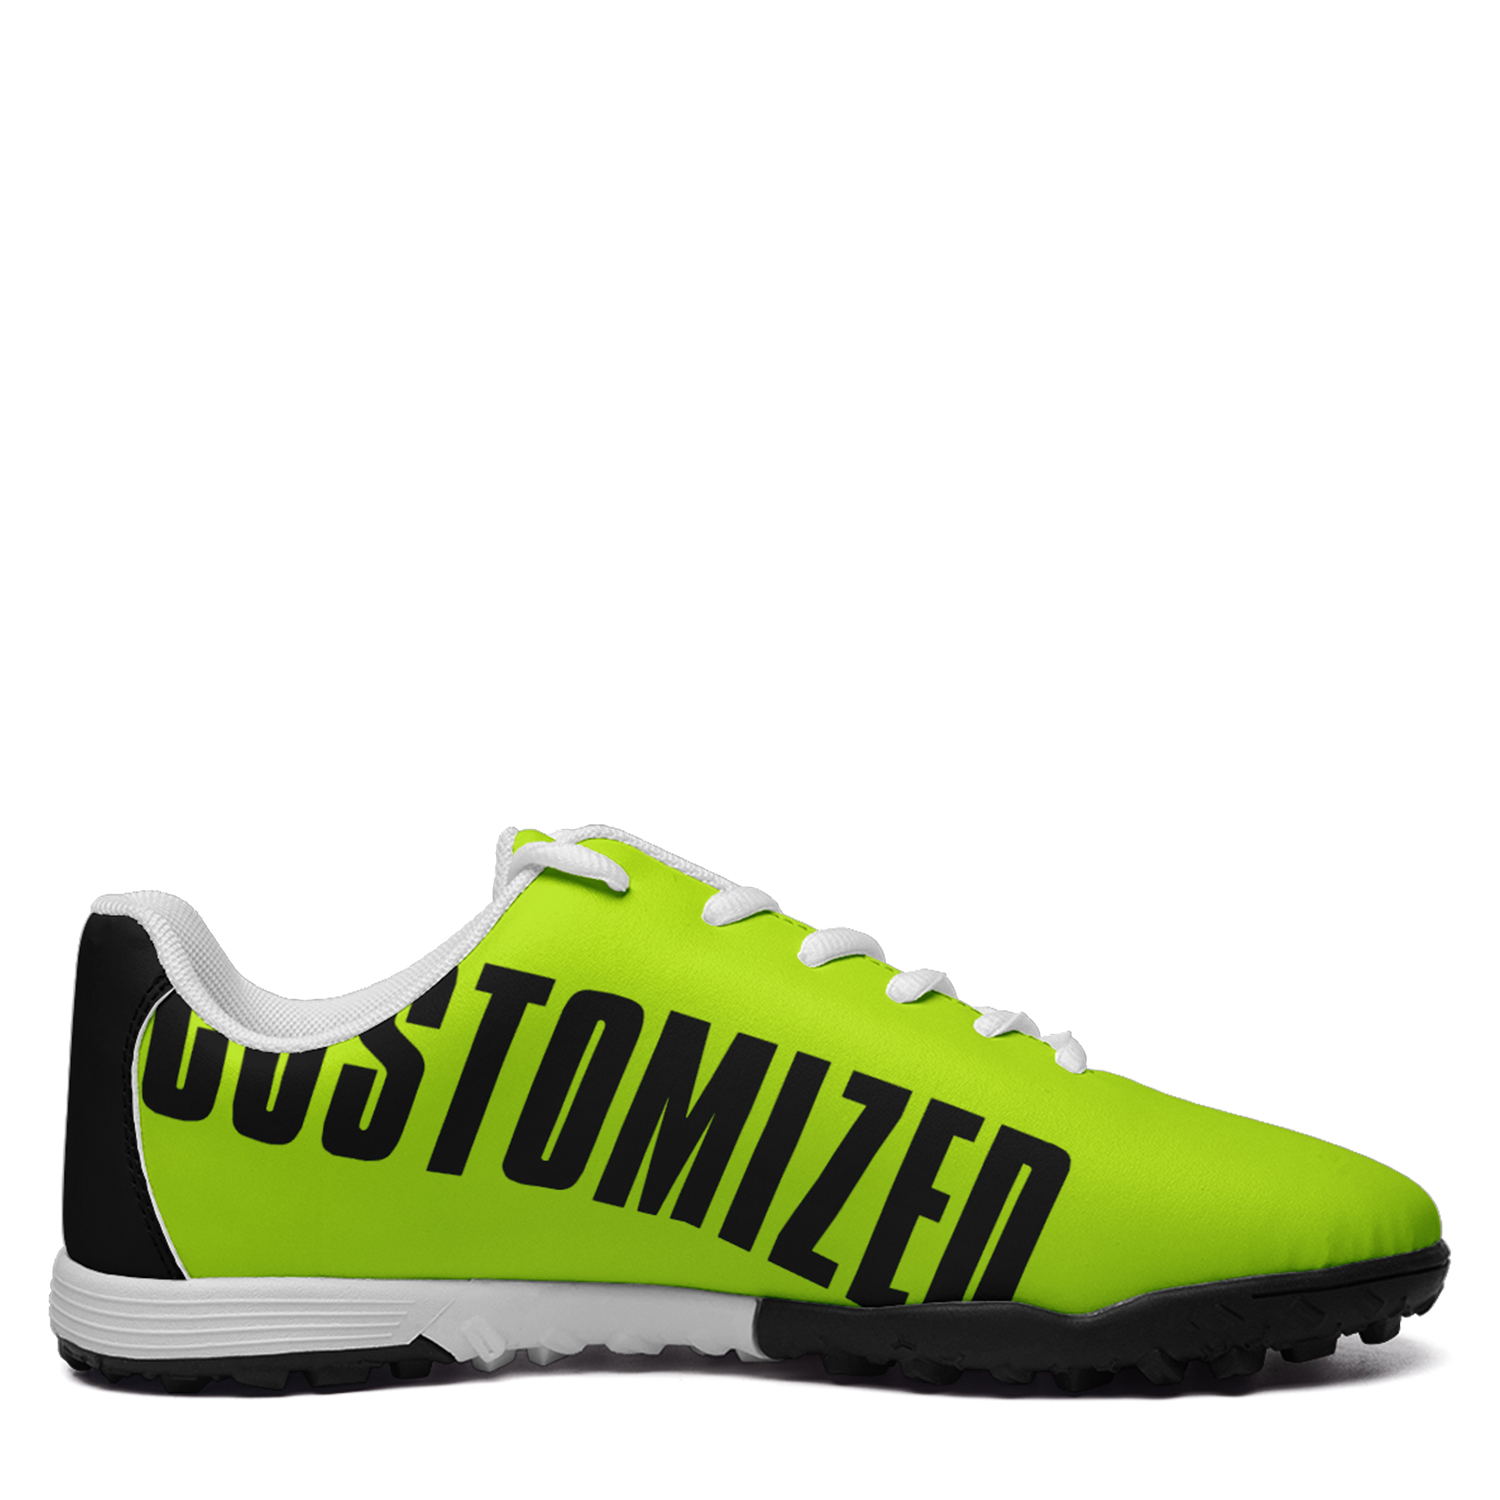 Custom 2022 World Cup Mexico Team Soccer Shoes